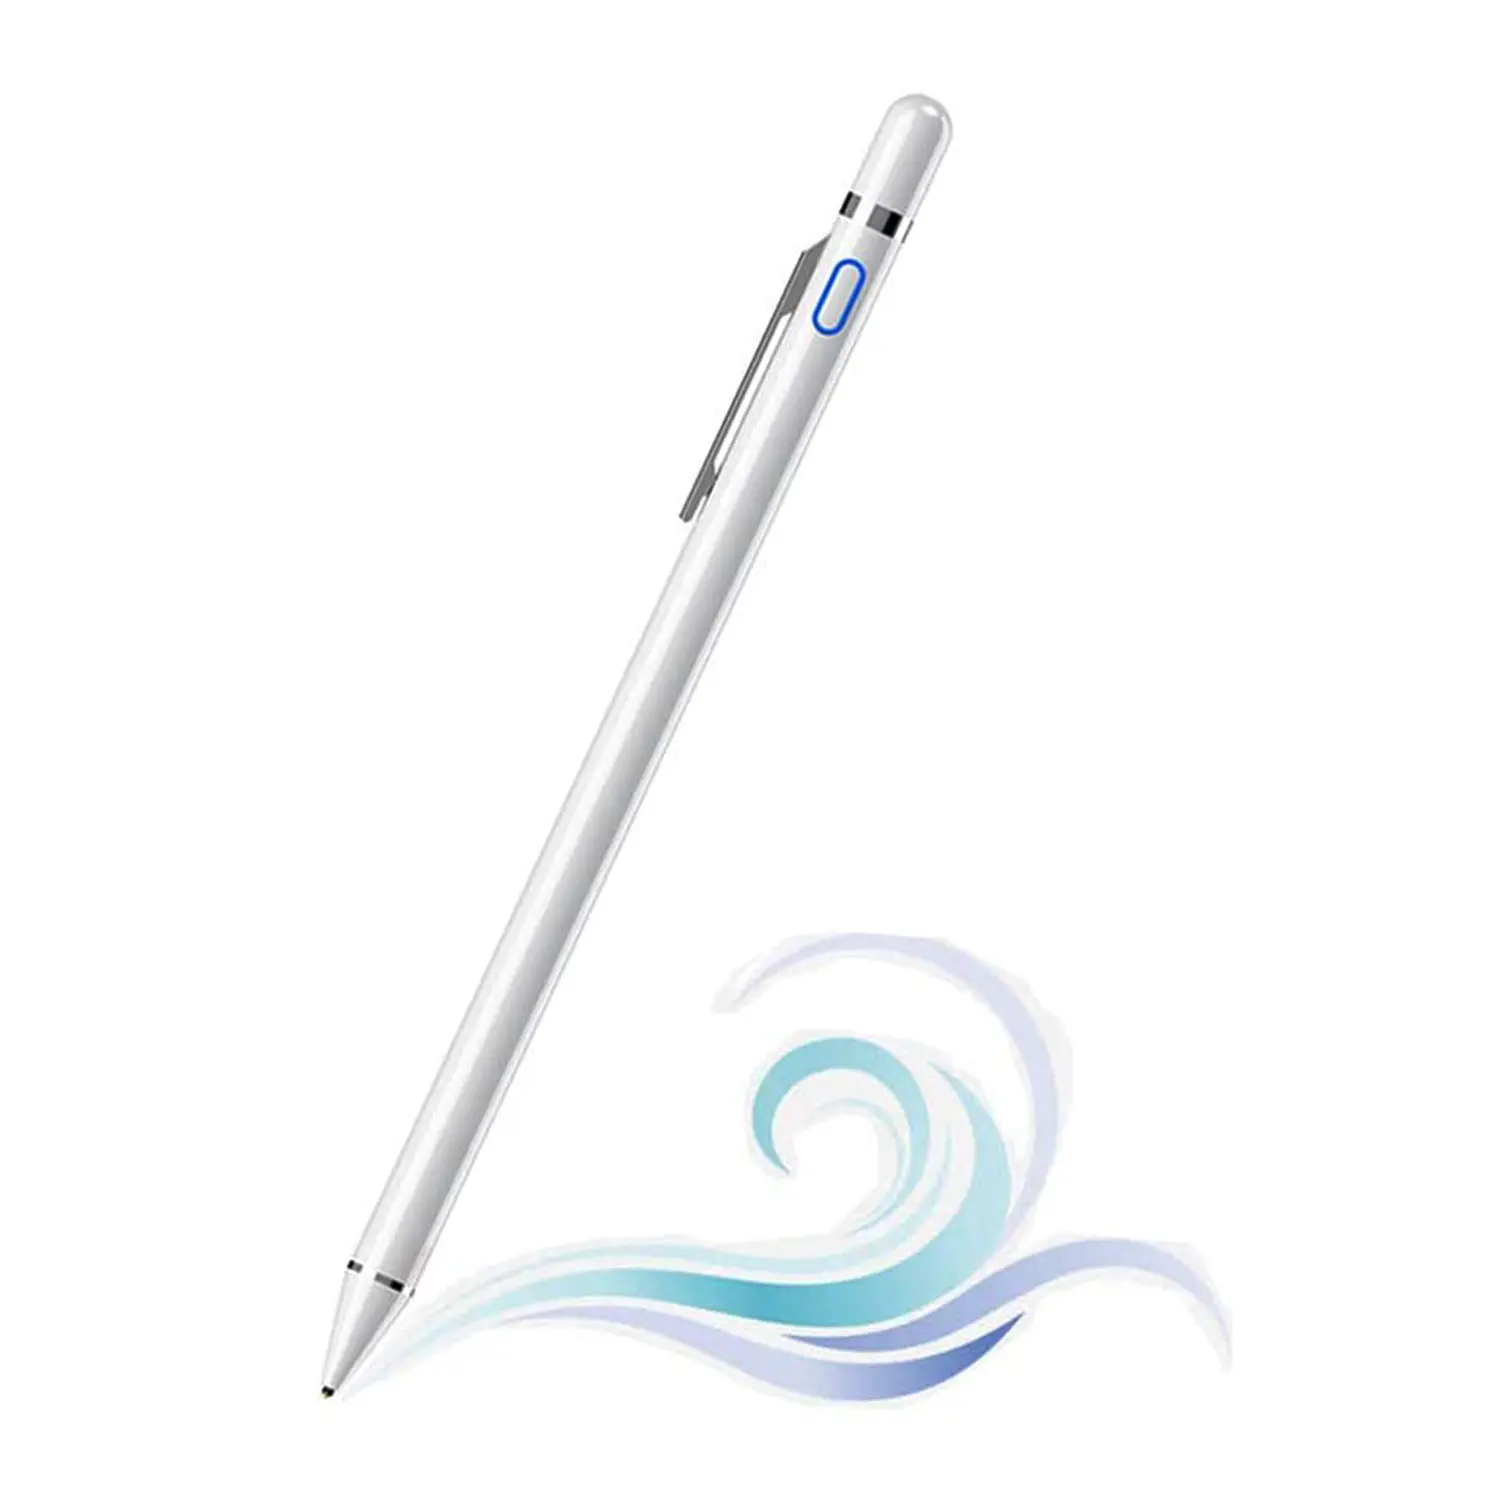 Bestbuy Wholesale Tablet Pencils Android Stylus Pen Active Capacitive Stylus for Touch Screen